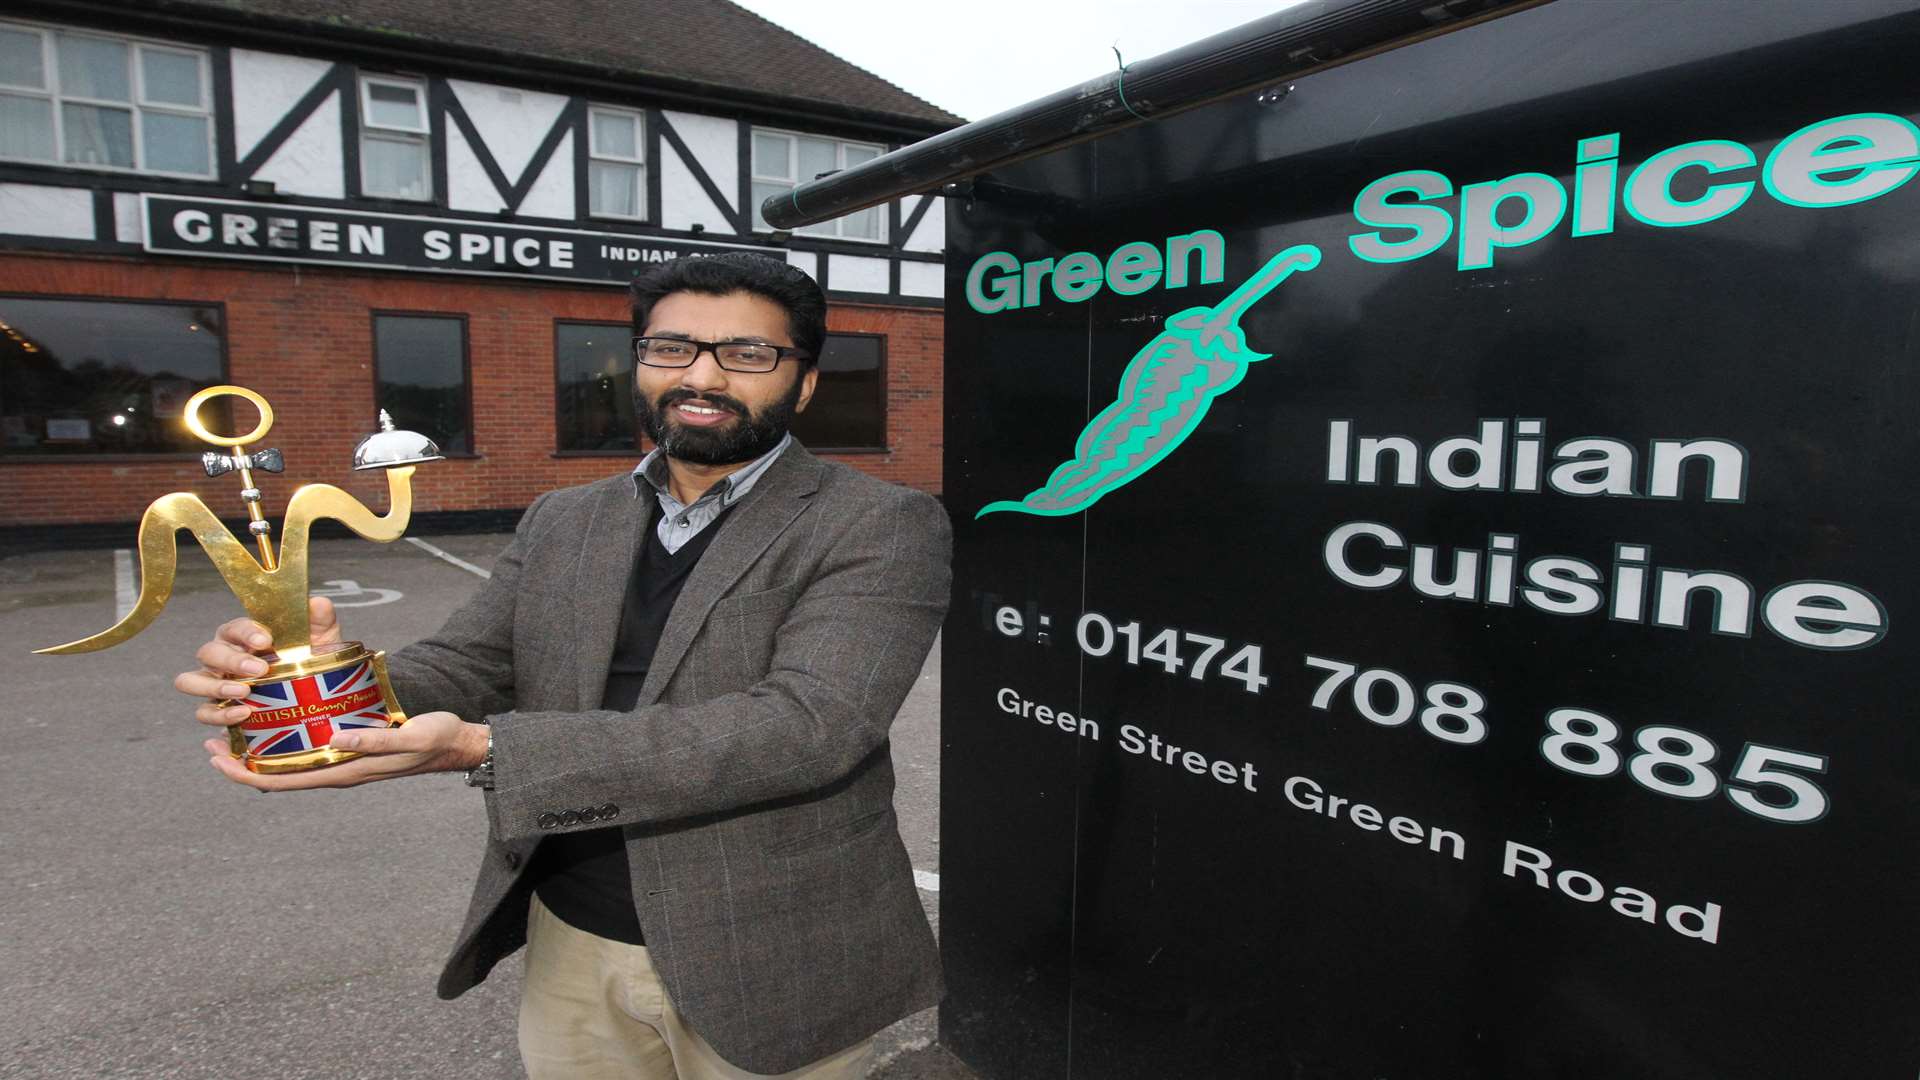 Sam Islam, owner of The Green Spice proudly shows off his British Curry Award.